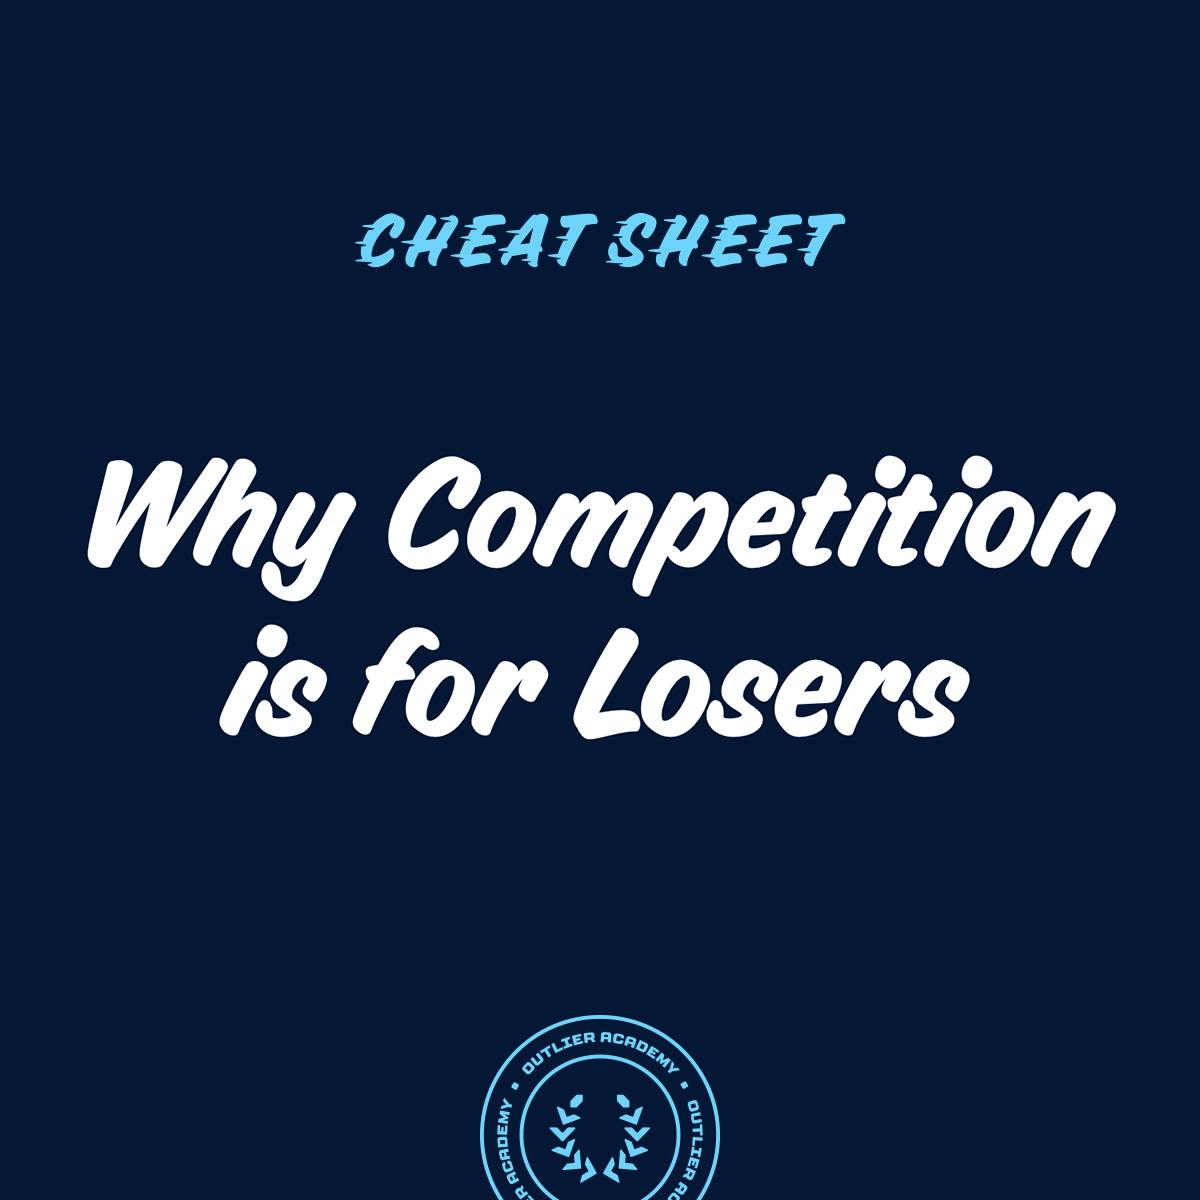 Cheat Sheet: On Category Creation, Languaging, and Why Competition is for Losers Image